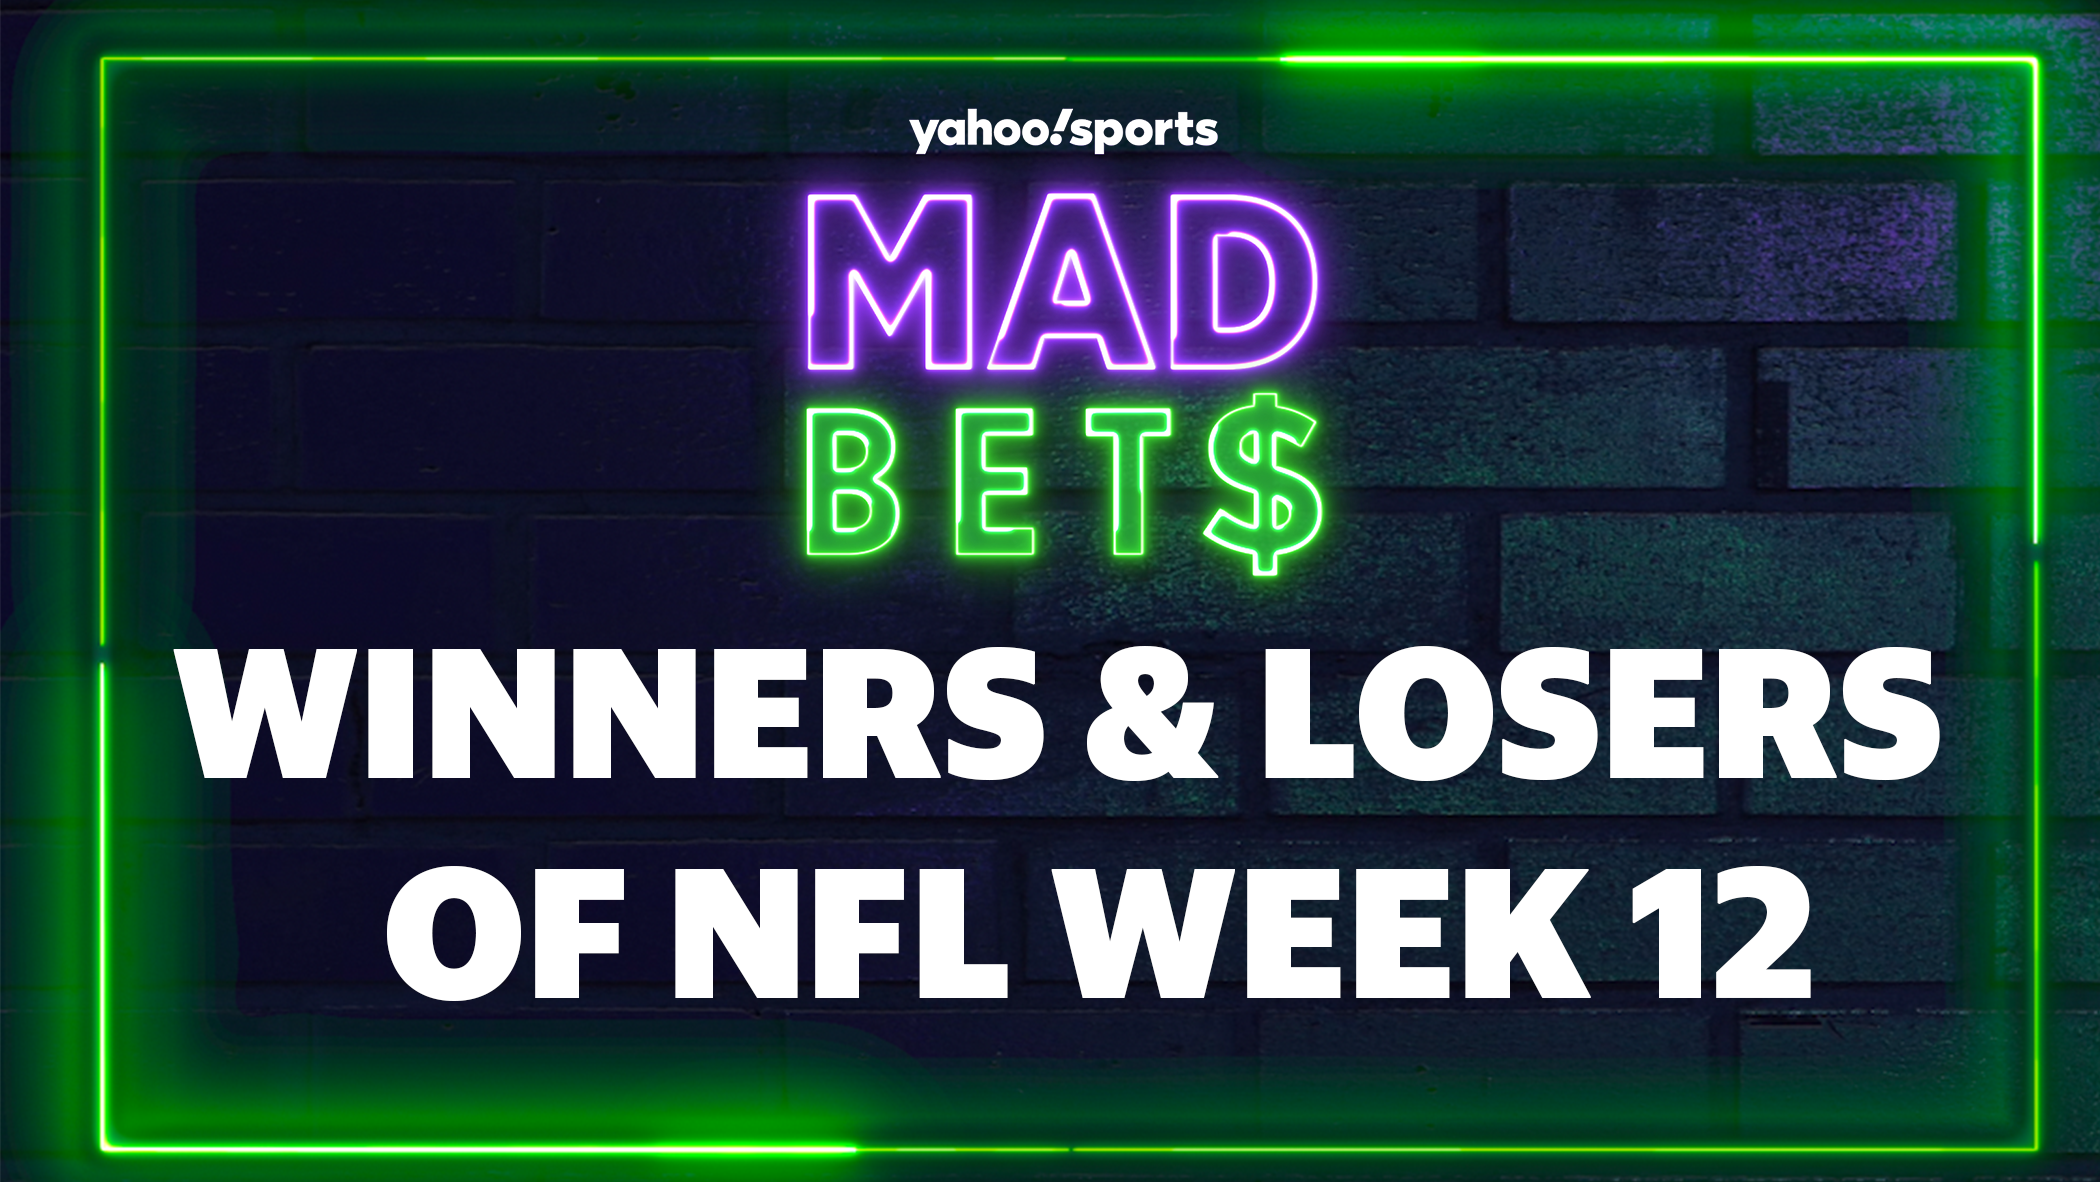 Sports betting winners and losers: A 10-team parlay worth $35,000